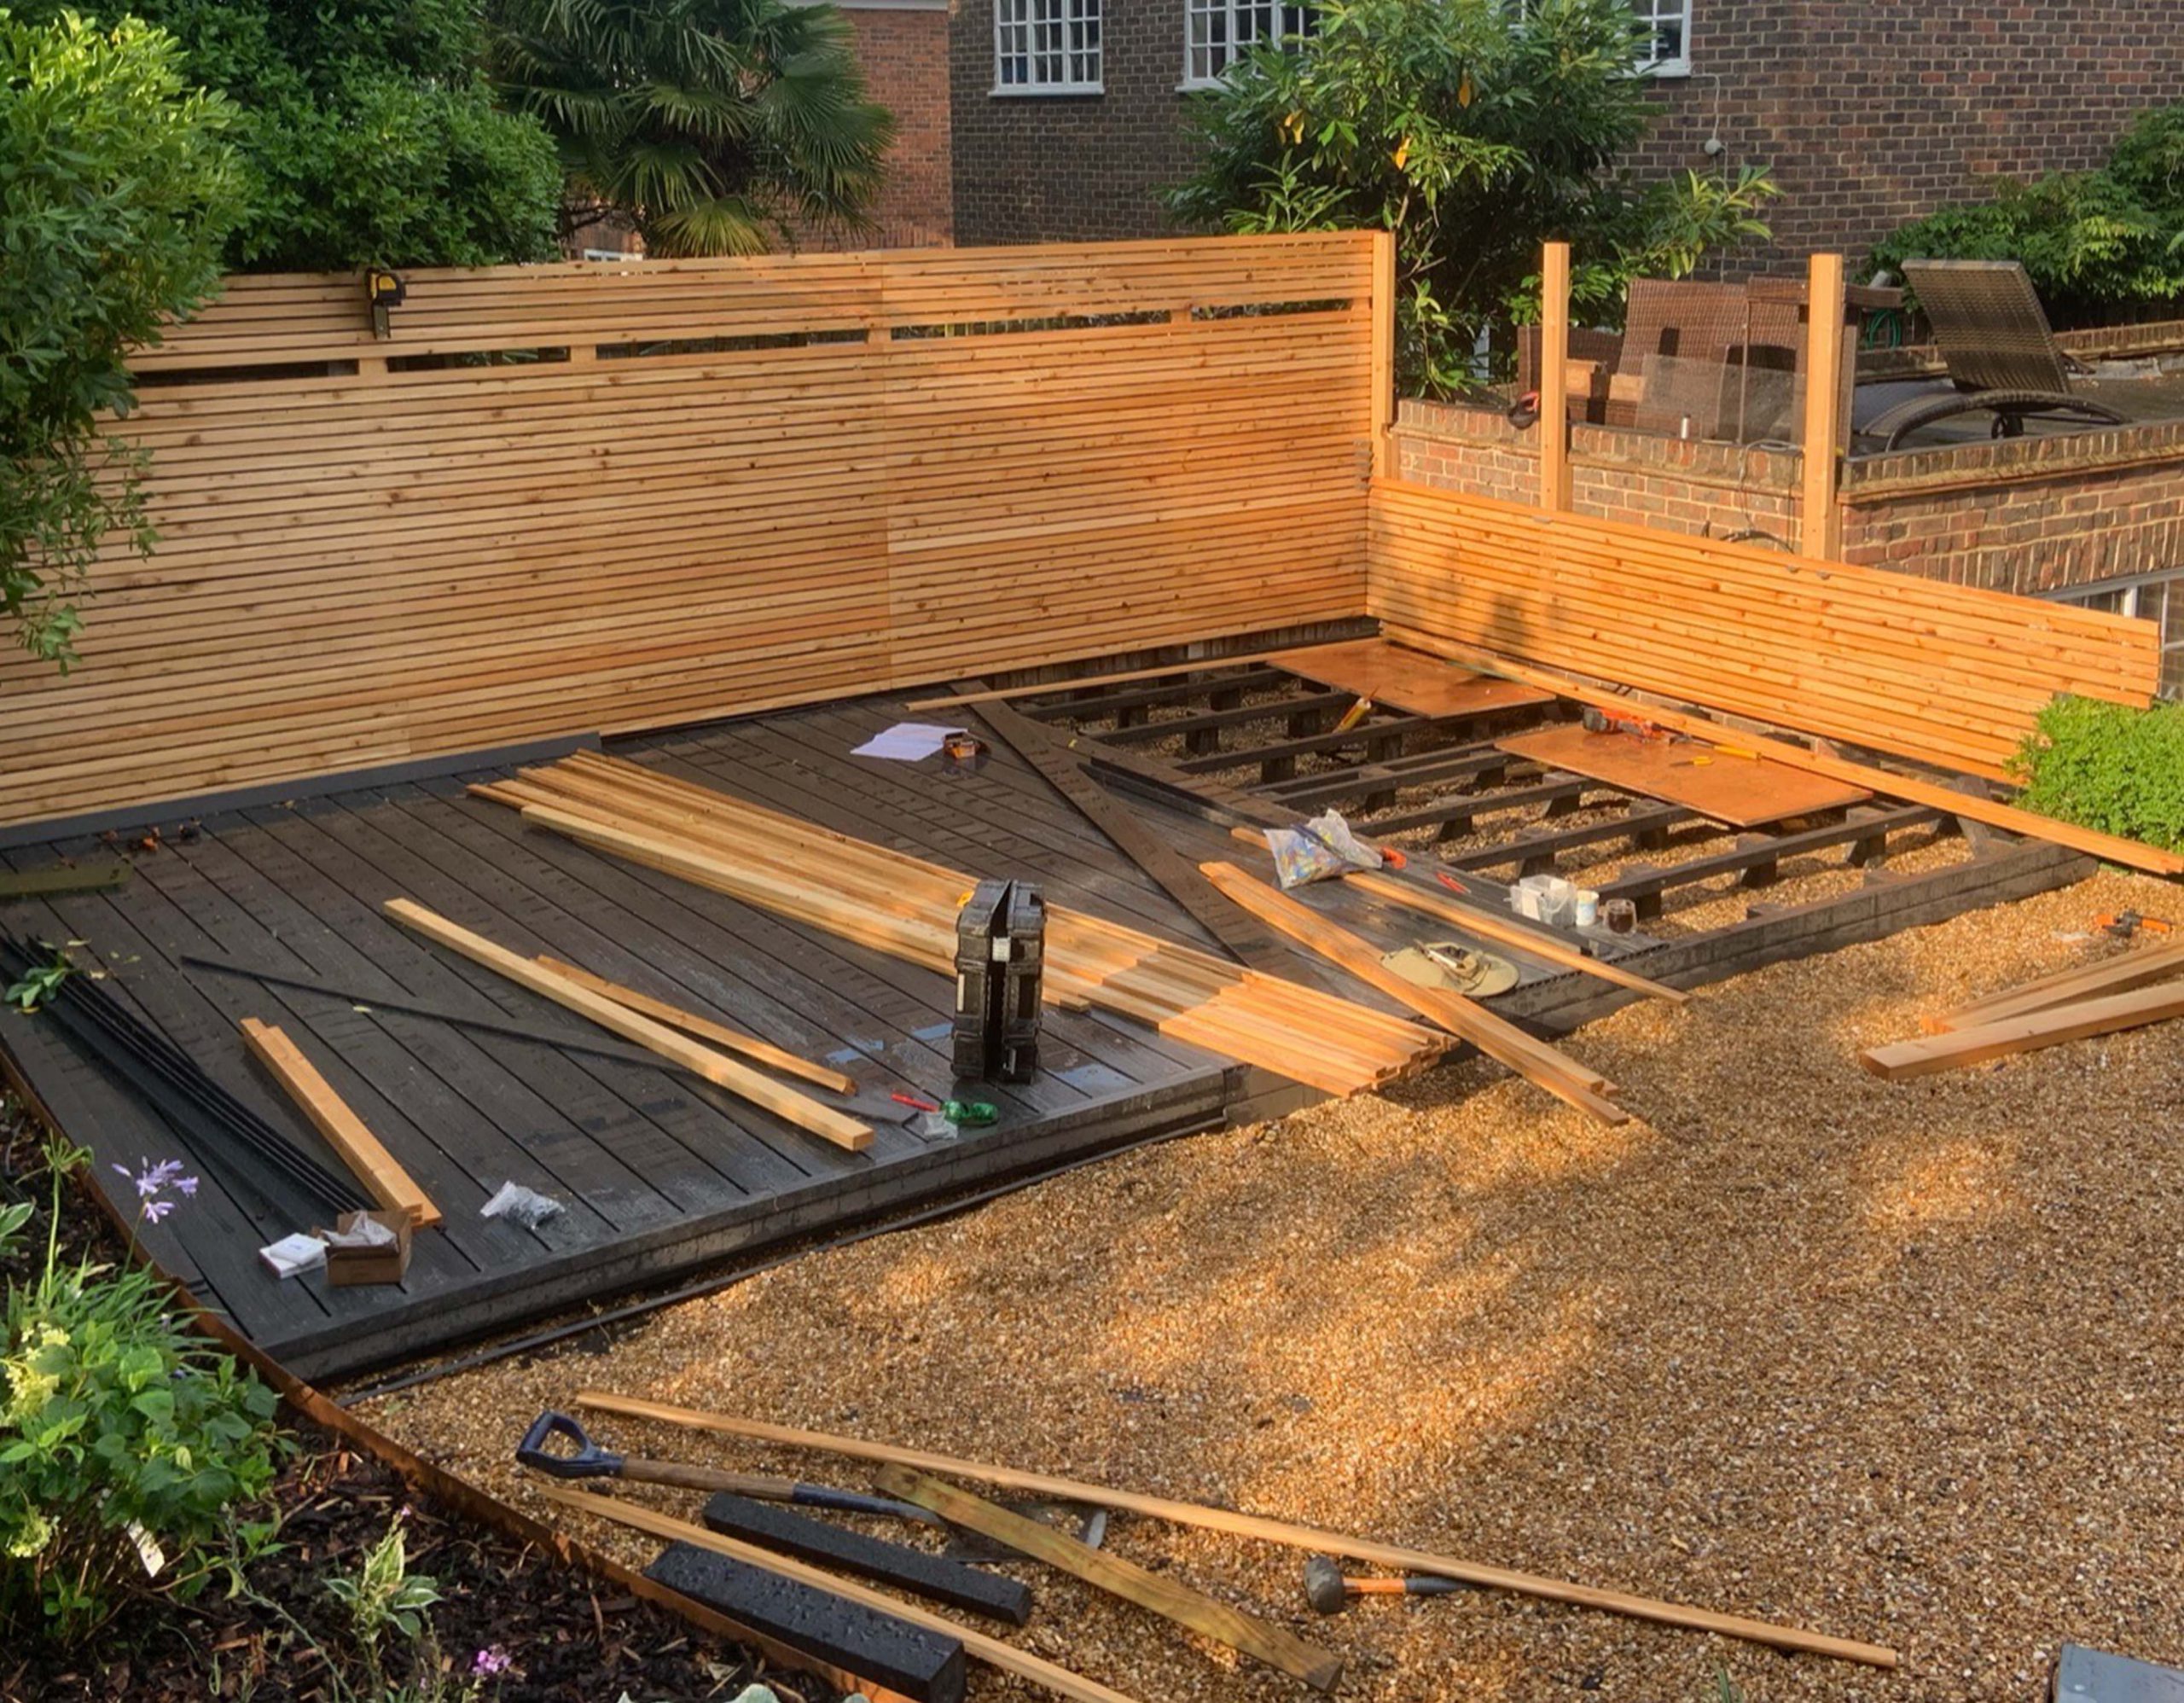 Sustainable decking being built and installed in a garden